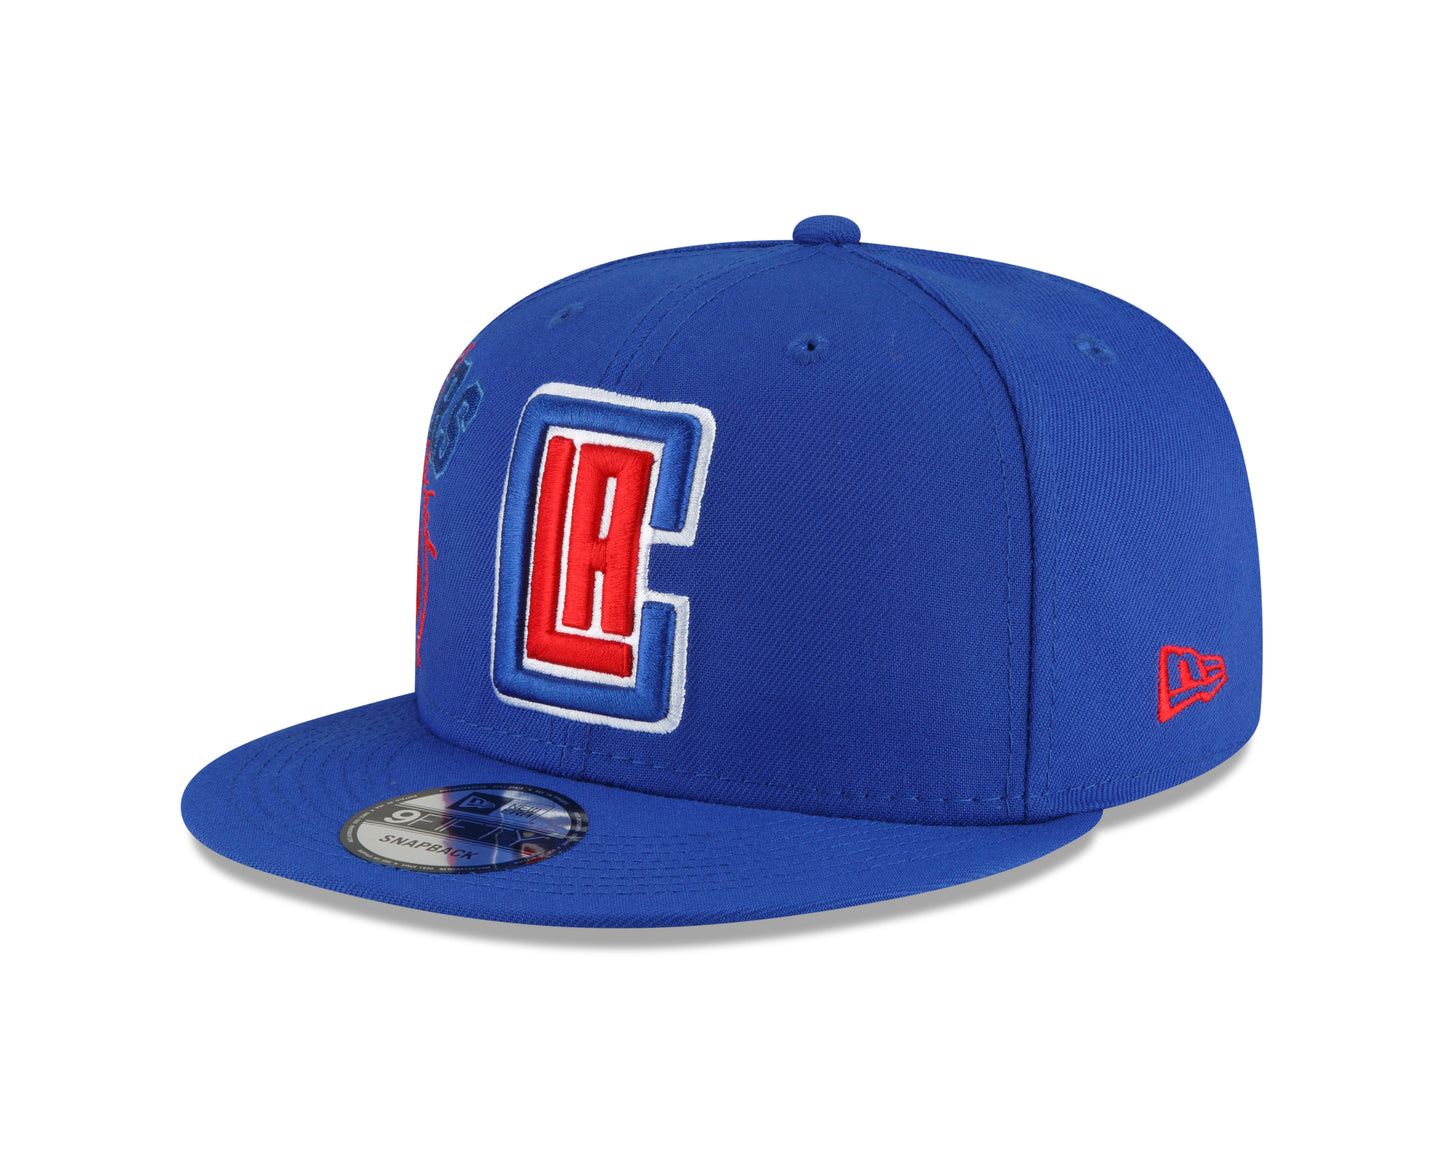 Los Angeles Clippers Authentic Back Half Series 9FIFTY Snap Back Hat - Blue